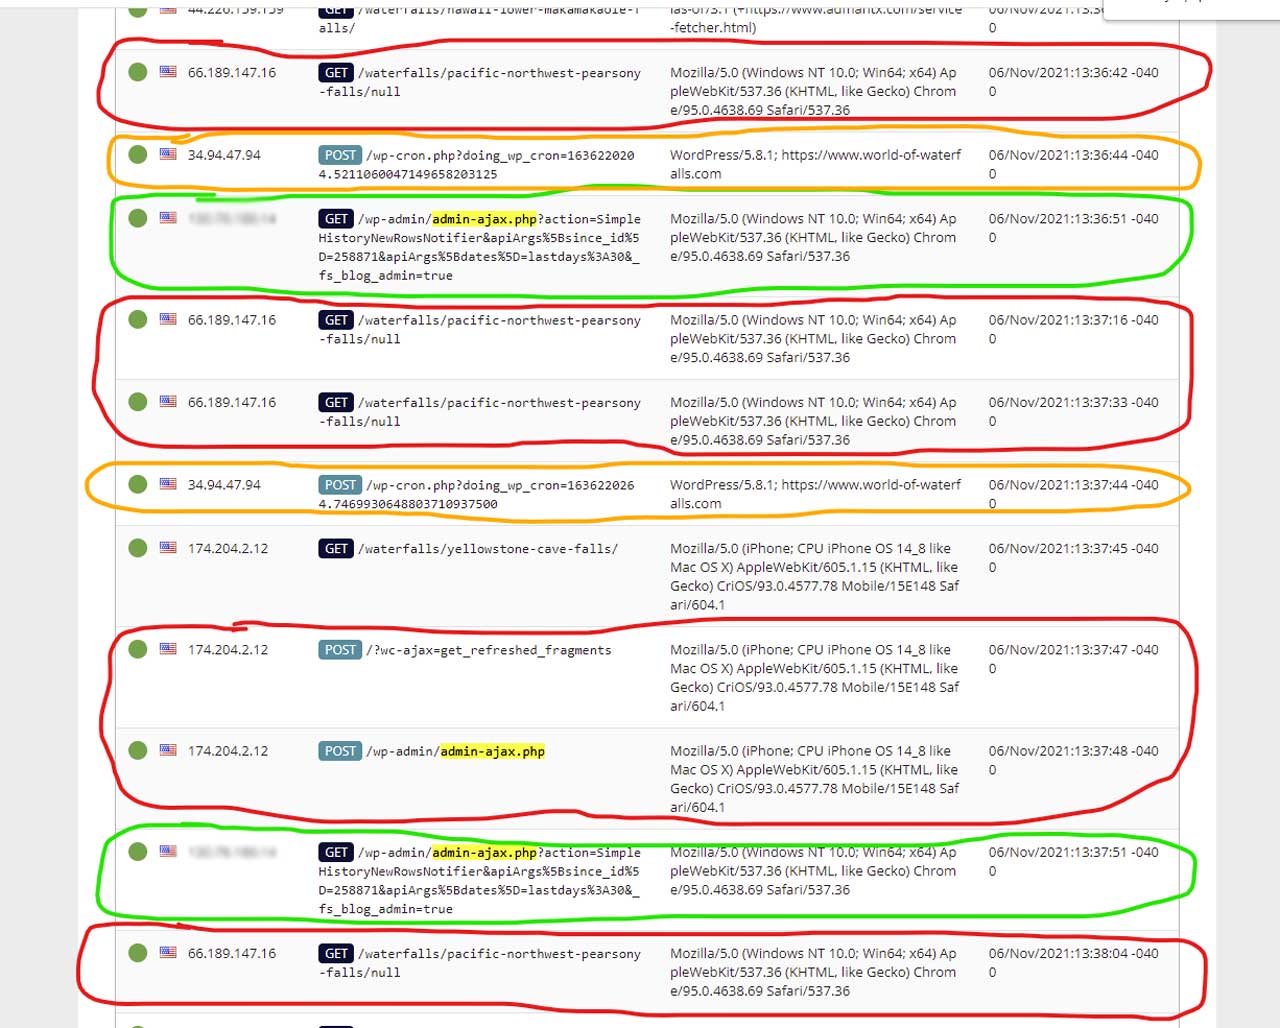 Reading the Sucuri logs and trying to figure out which accesses were legitimate and which ones were not. This gives you an idea of how difficult a job it is to filter out bad traffic while still letting through valid traffic. The green circles are my own requests, the orange circles are the Google Bot, and the red circles are suspicious requests